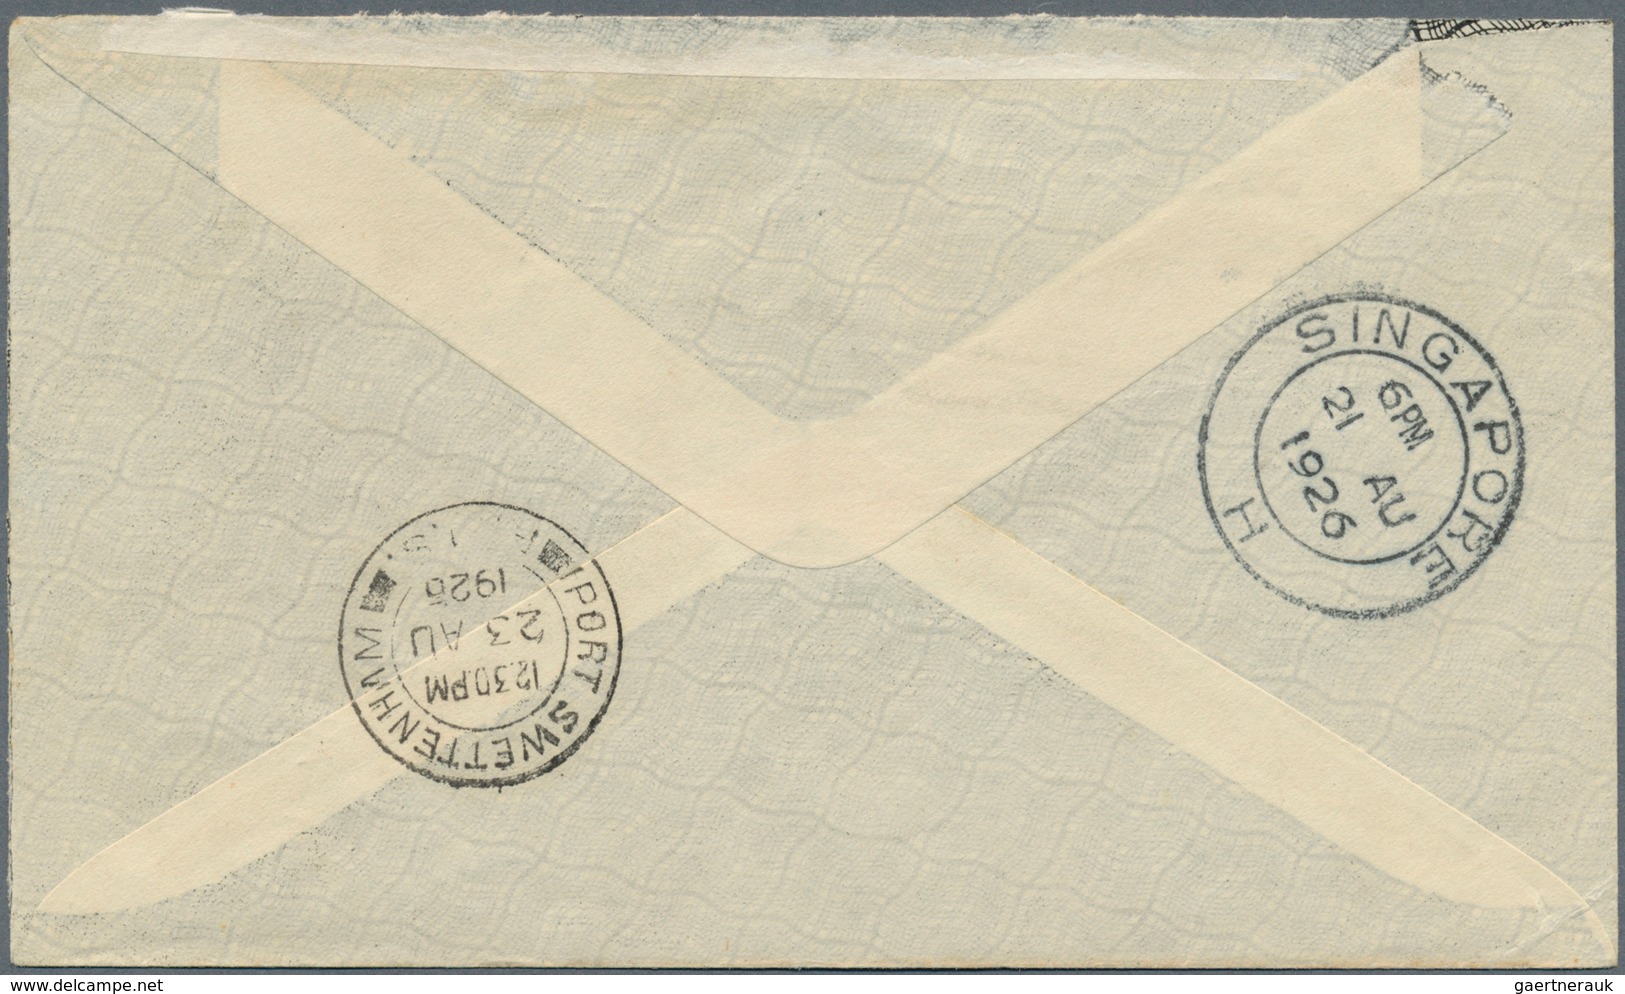 Singapur: 1926 (21.8.), Internal Airmail Letter By Air Survey Company At 4c. Local Rate Bearing Hori - Singapore (...-1959)